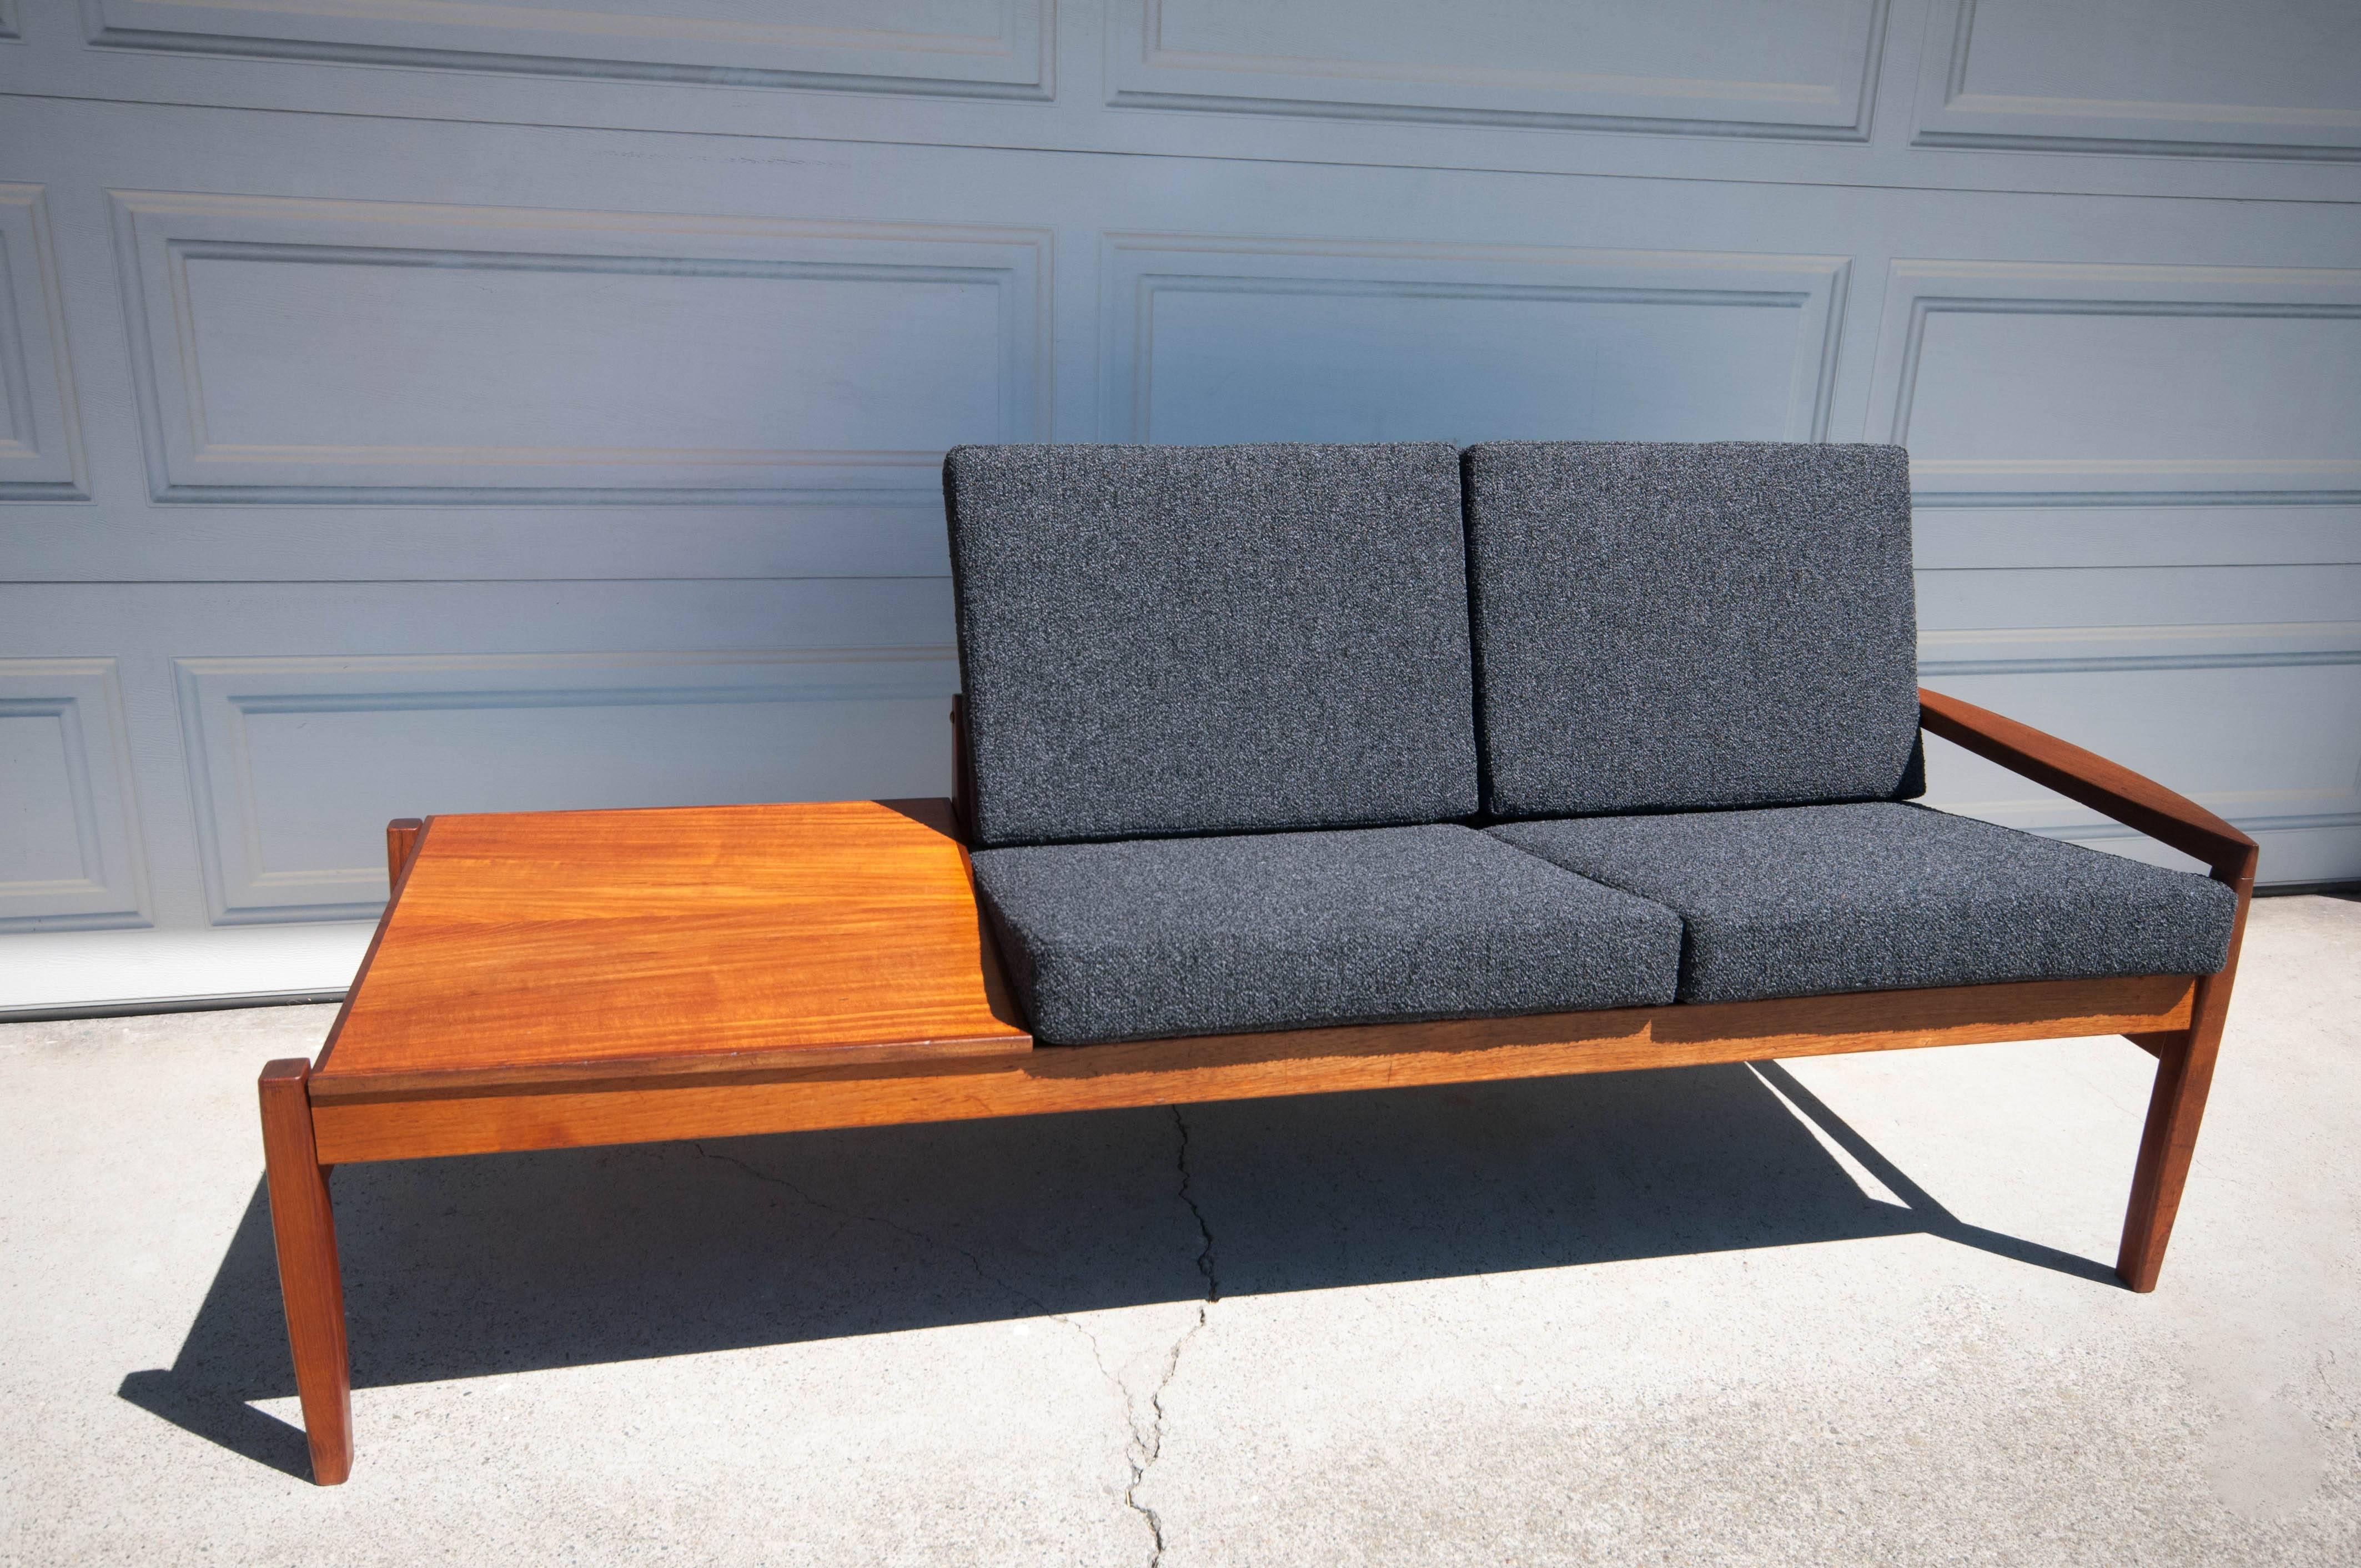 Danish Modular Sofa Set by Hans Olsen in teak. This piece features one end table and two caned back seats that can be arranged in any order. Seats have been newly reupholstered in a charcoal gray Maharam Kvadrat fabric.